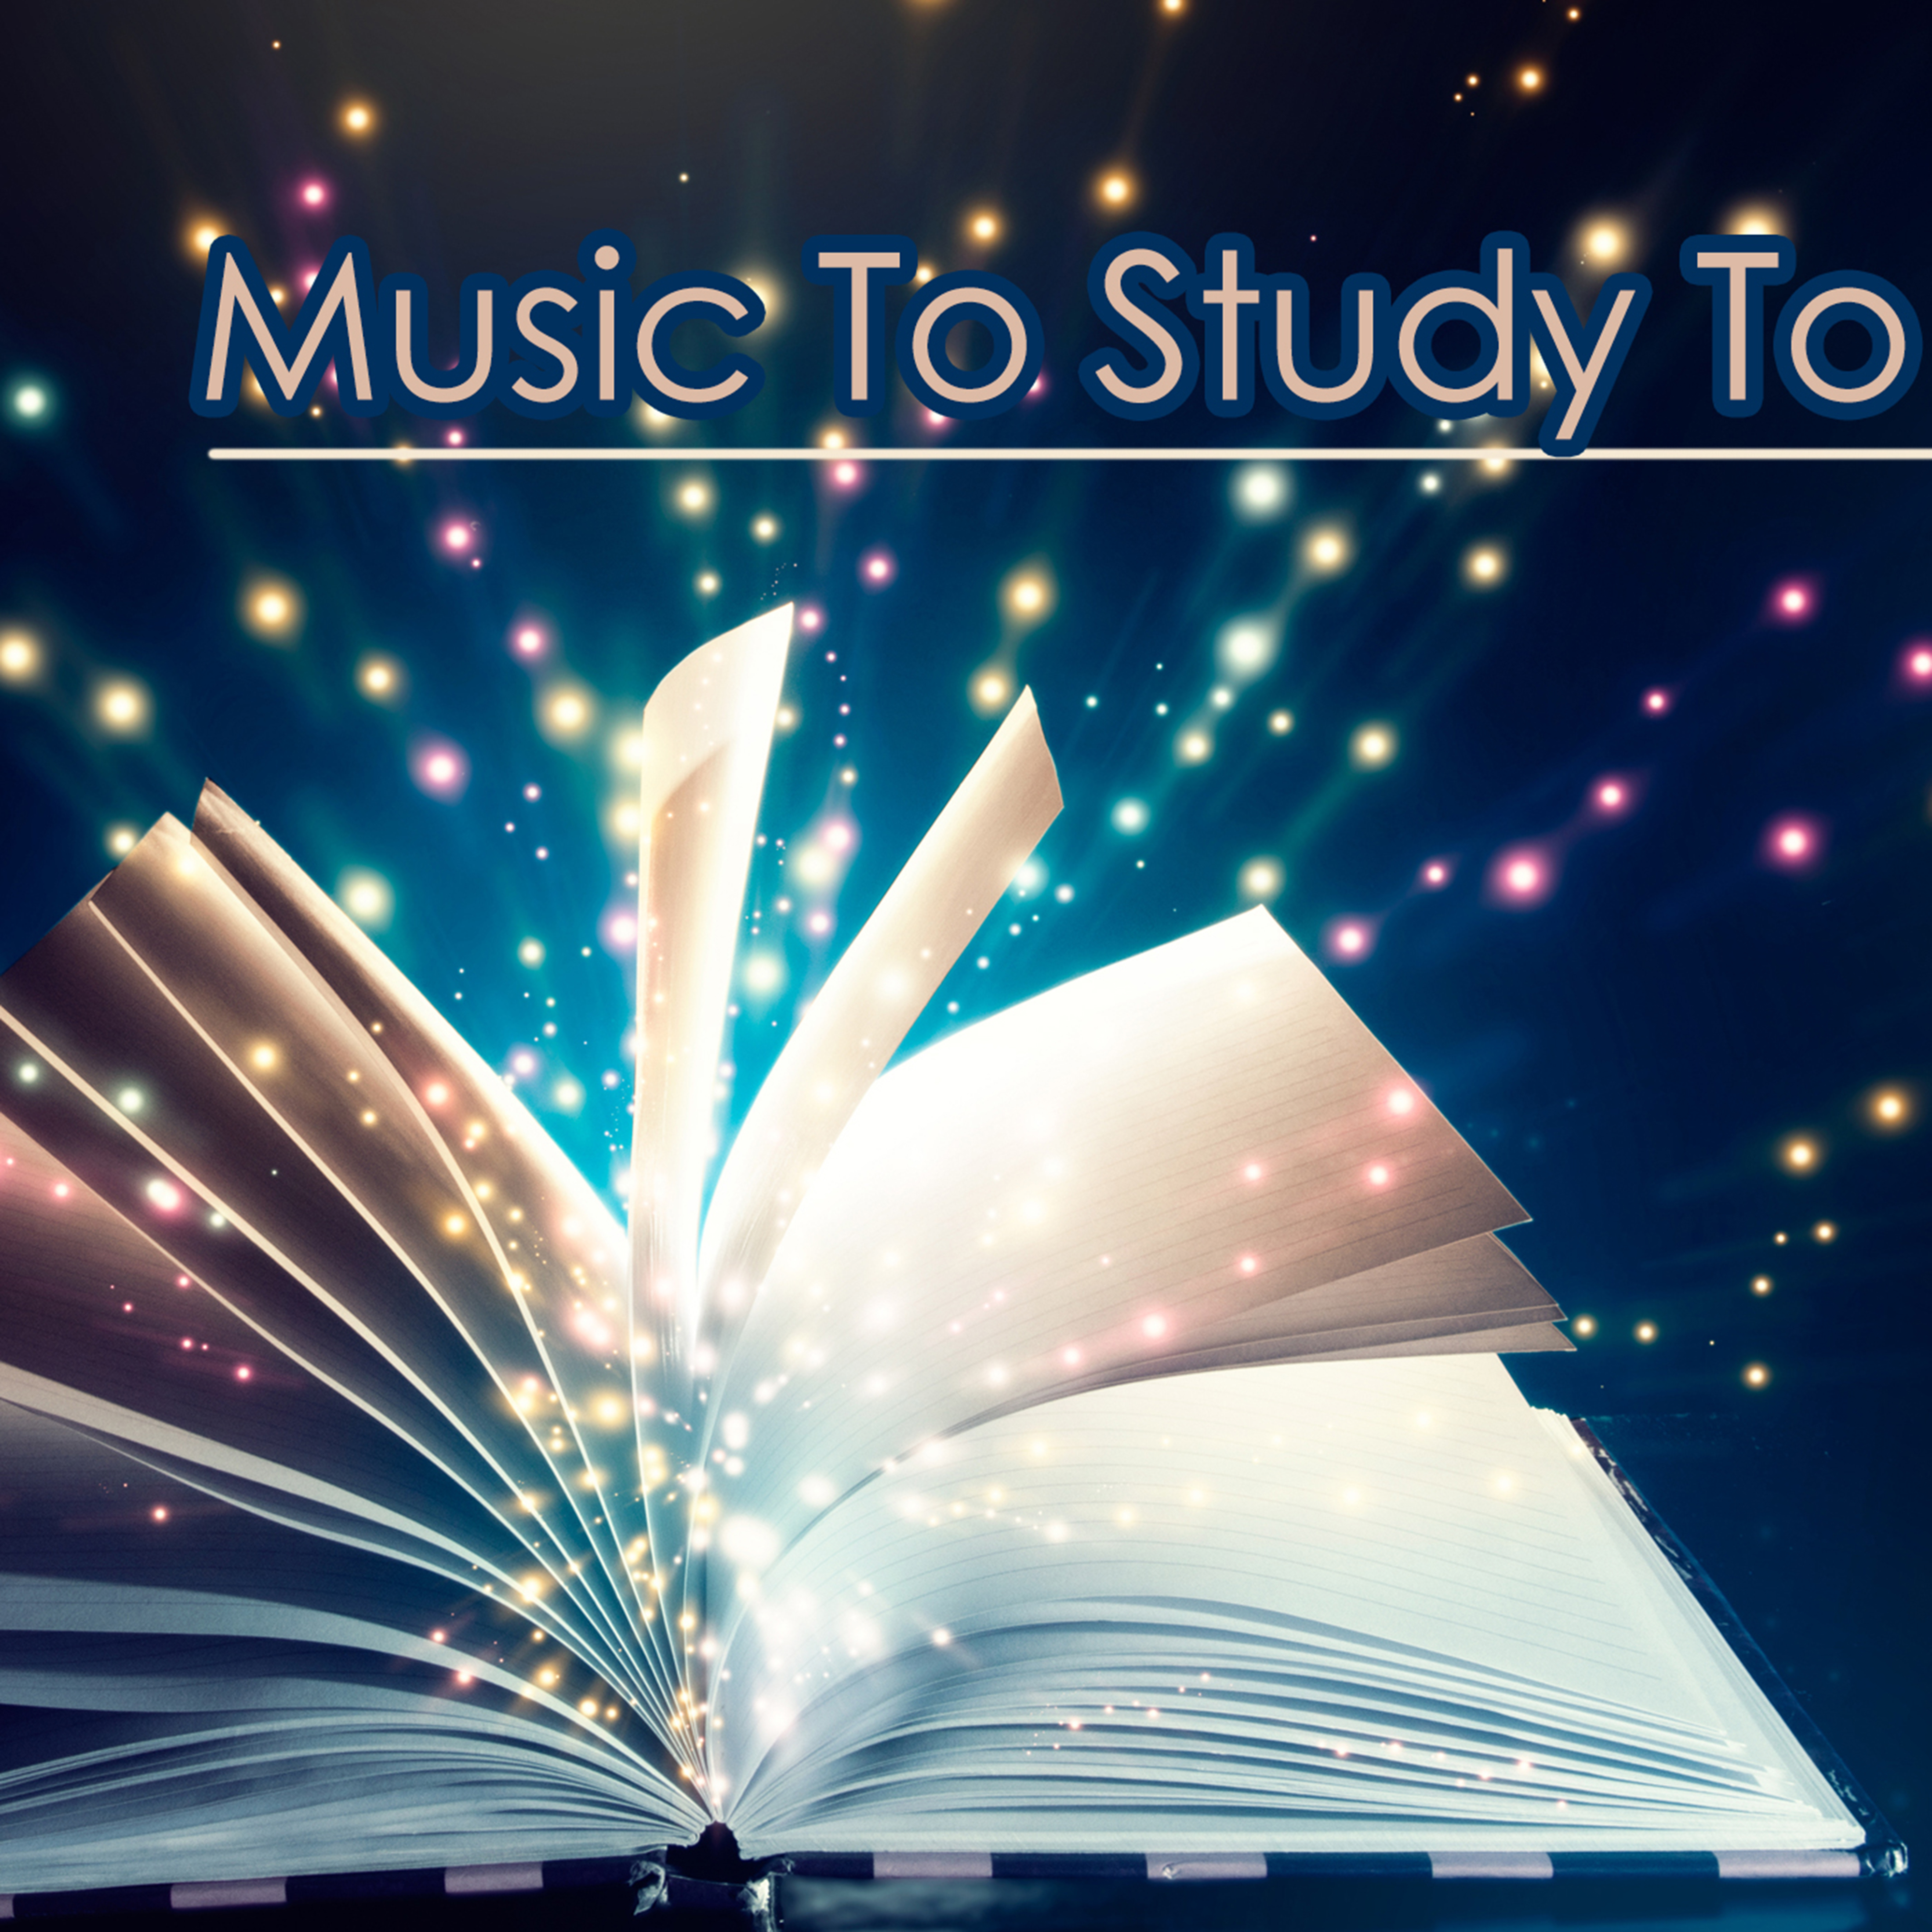 Music to Study To - Best Study Music for Exams, Relaxing Songs